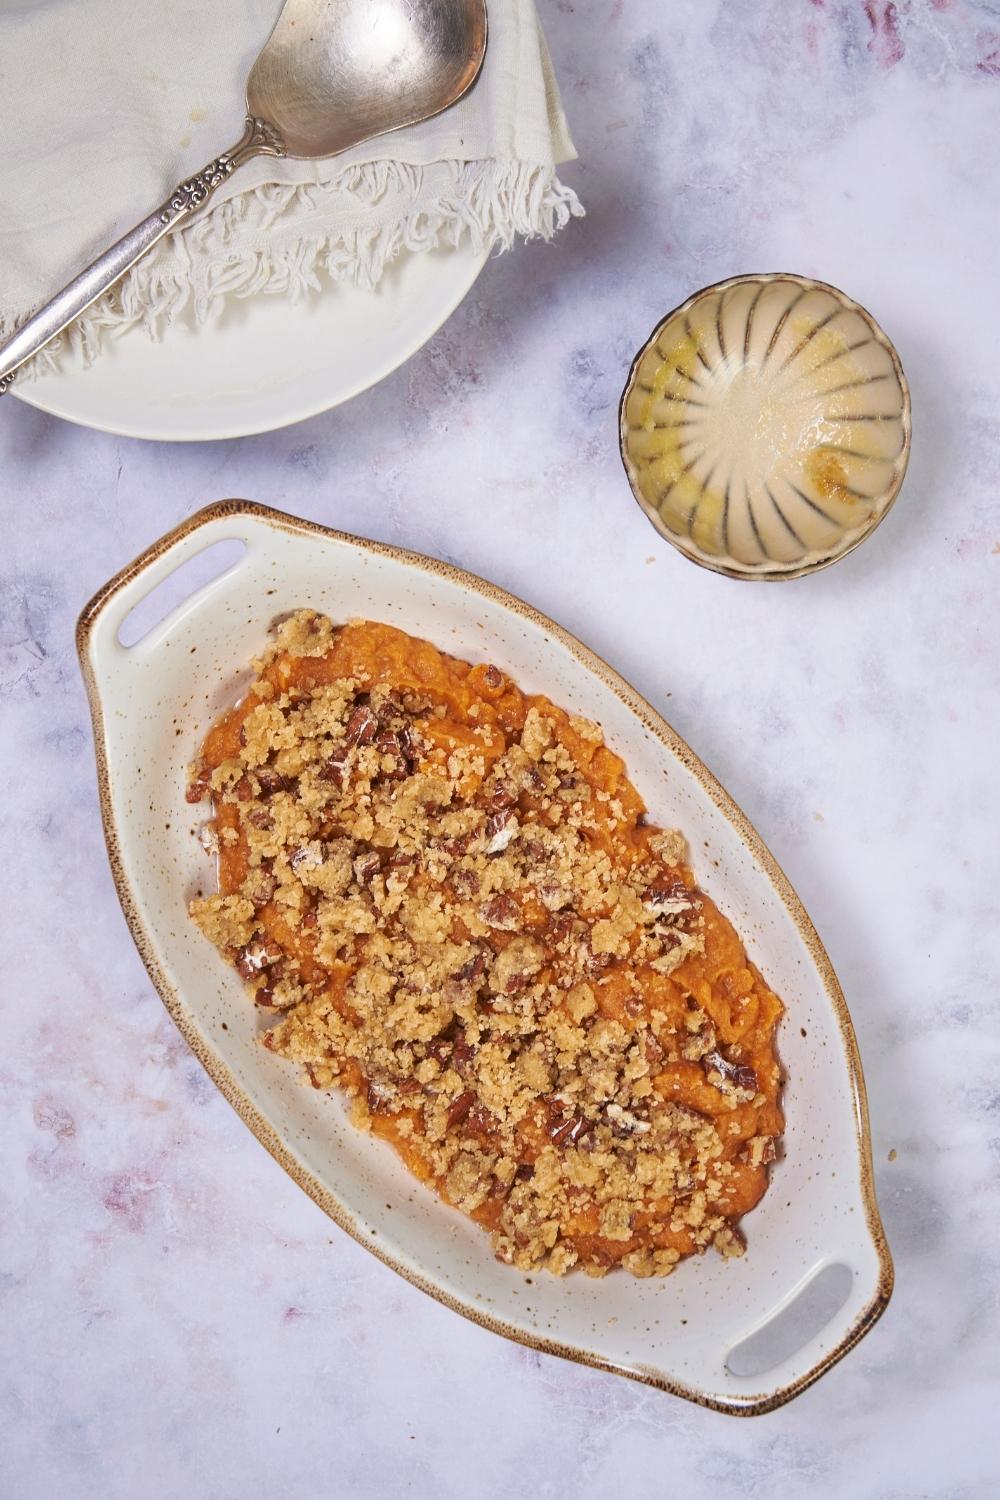 White baking dish with unbaked sweet potato casserole and a pecan crumble topping.